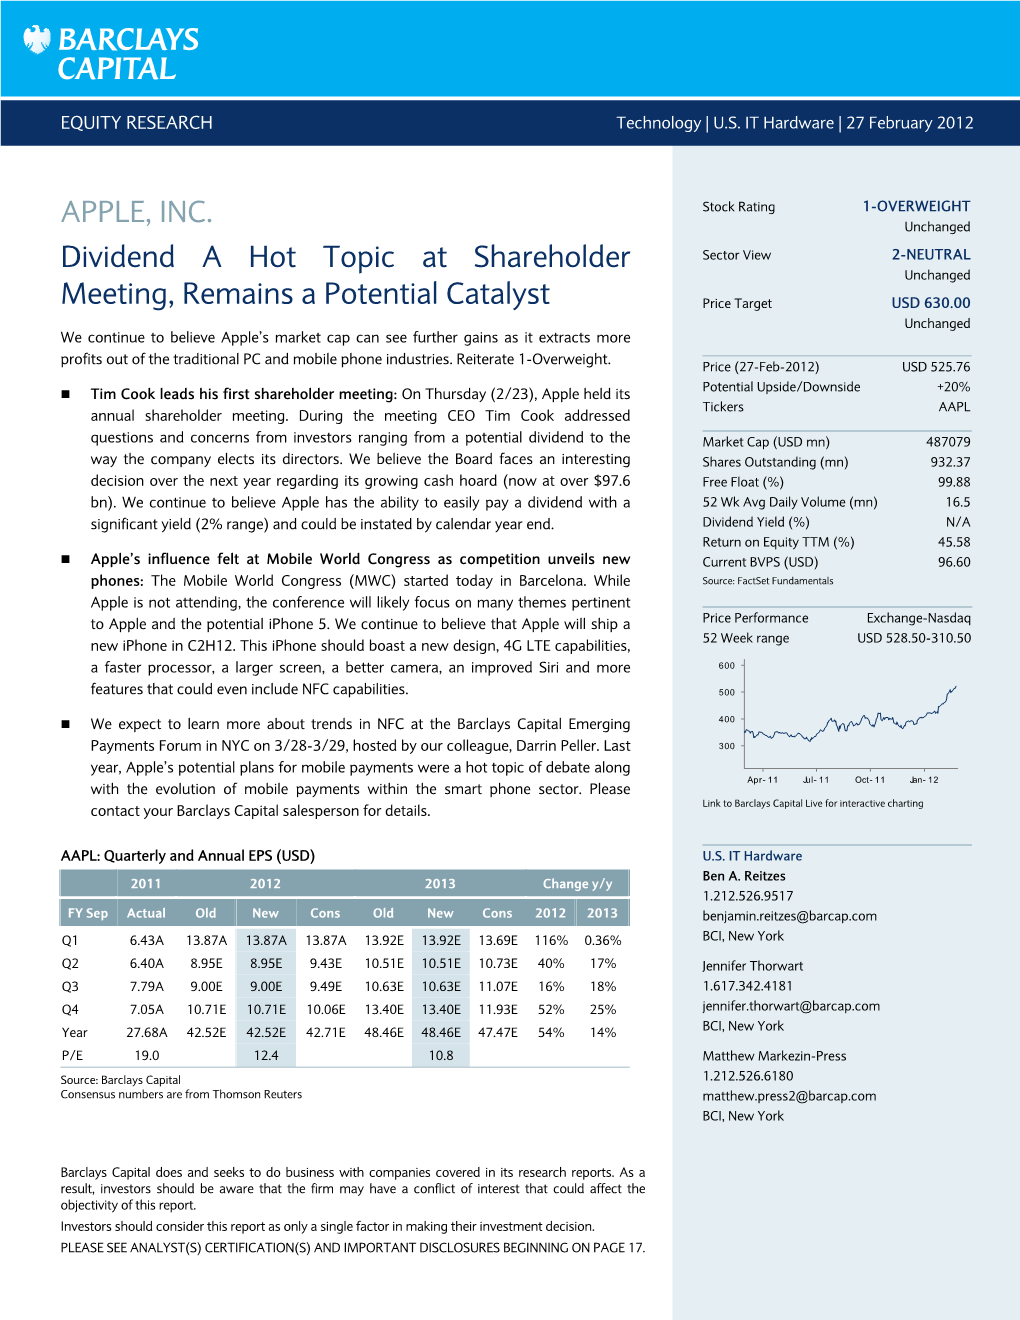 Apple, Inc.: Dividend a Hot Topic at Shareholder Meeting, Remains